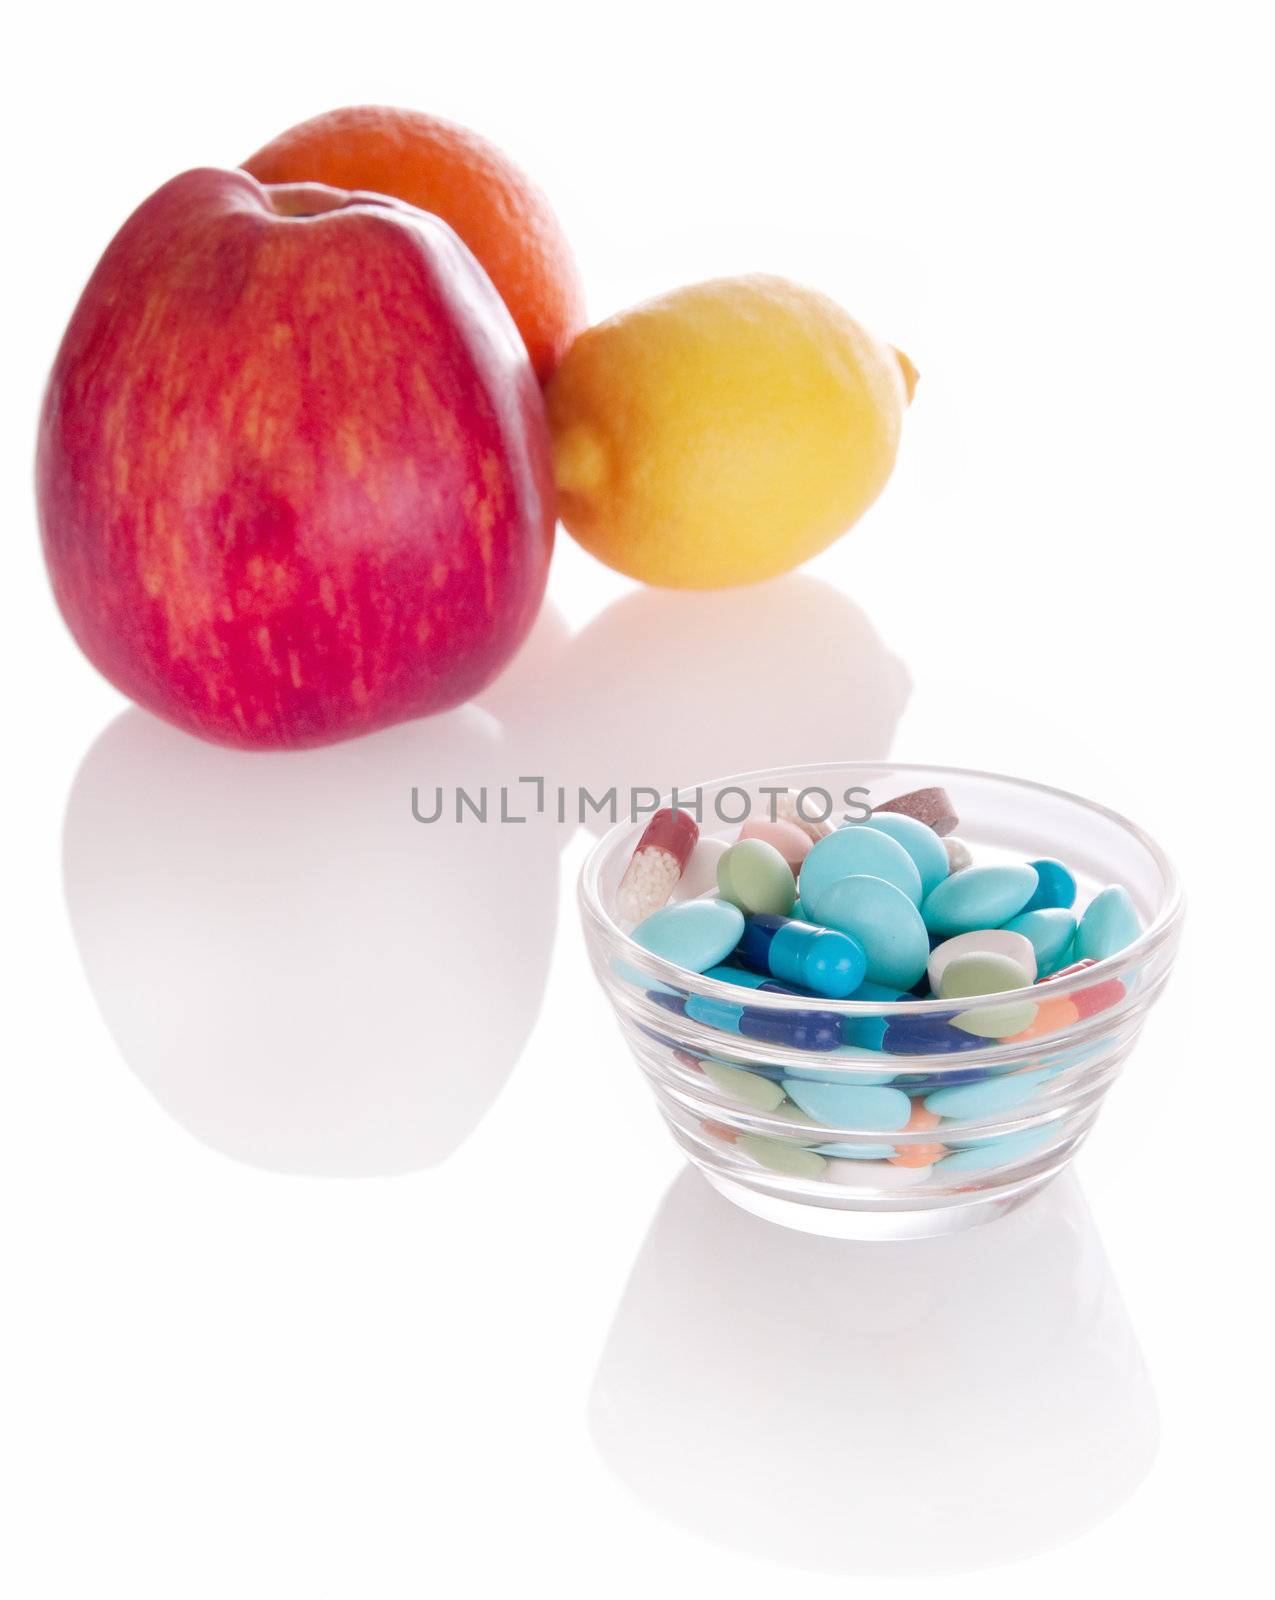 Concept of vitamin medicine with different pills in glass bowl and defocused fruits on background with soft shadows